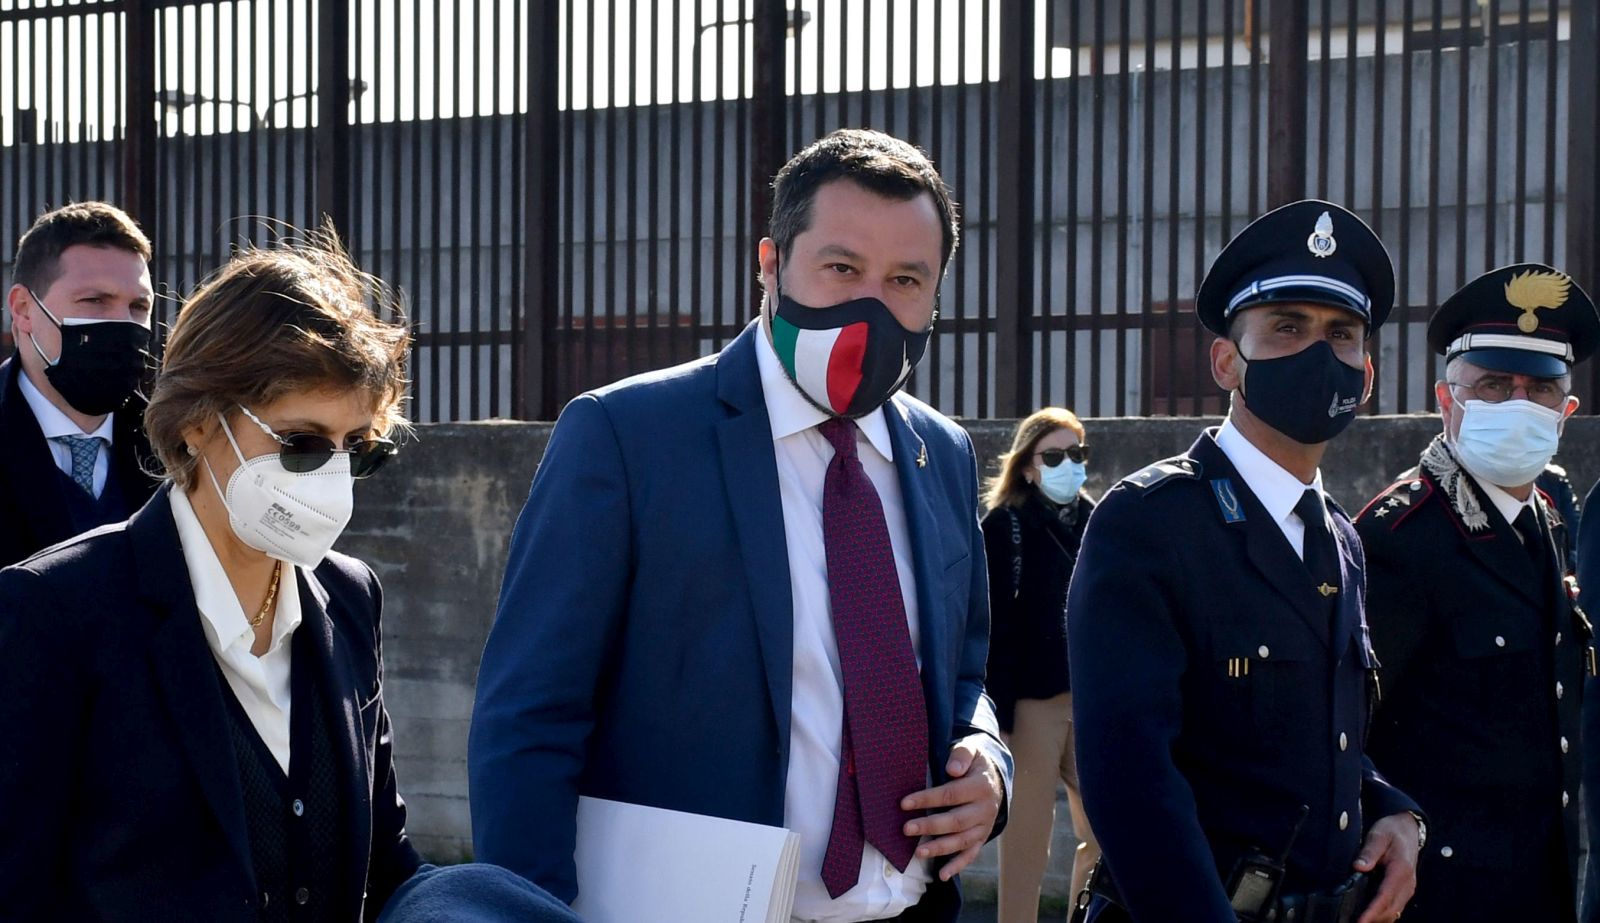 epa09126053 Italy's League Party leader and former Italian Interior Minister Matteo Salvini (C), flanked by his lawyer Giulia Bongiorno (L), arrives at the bunker hall room of the Bicocca prison for a preliminary hearing on the Gregoretti case, in Catania, Italy, 10 April 2021. Salvini is accused of kidnapping after he delayed the disembarkation of 131 migrants on Italian shores in July 2019.  EPA/ORIETTA SCARDINO